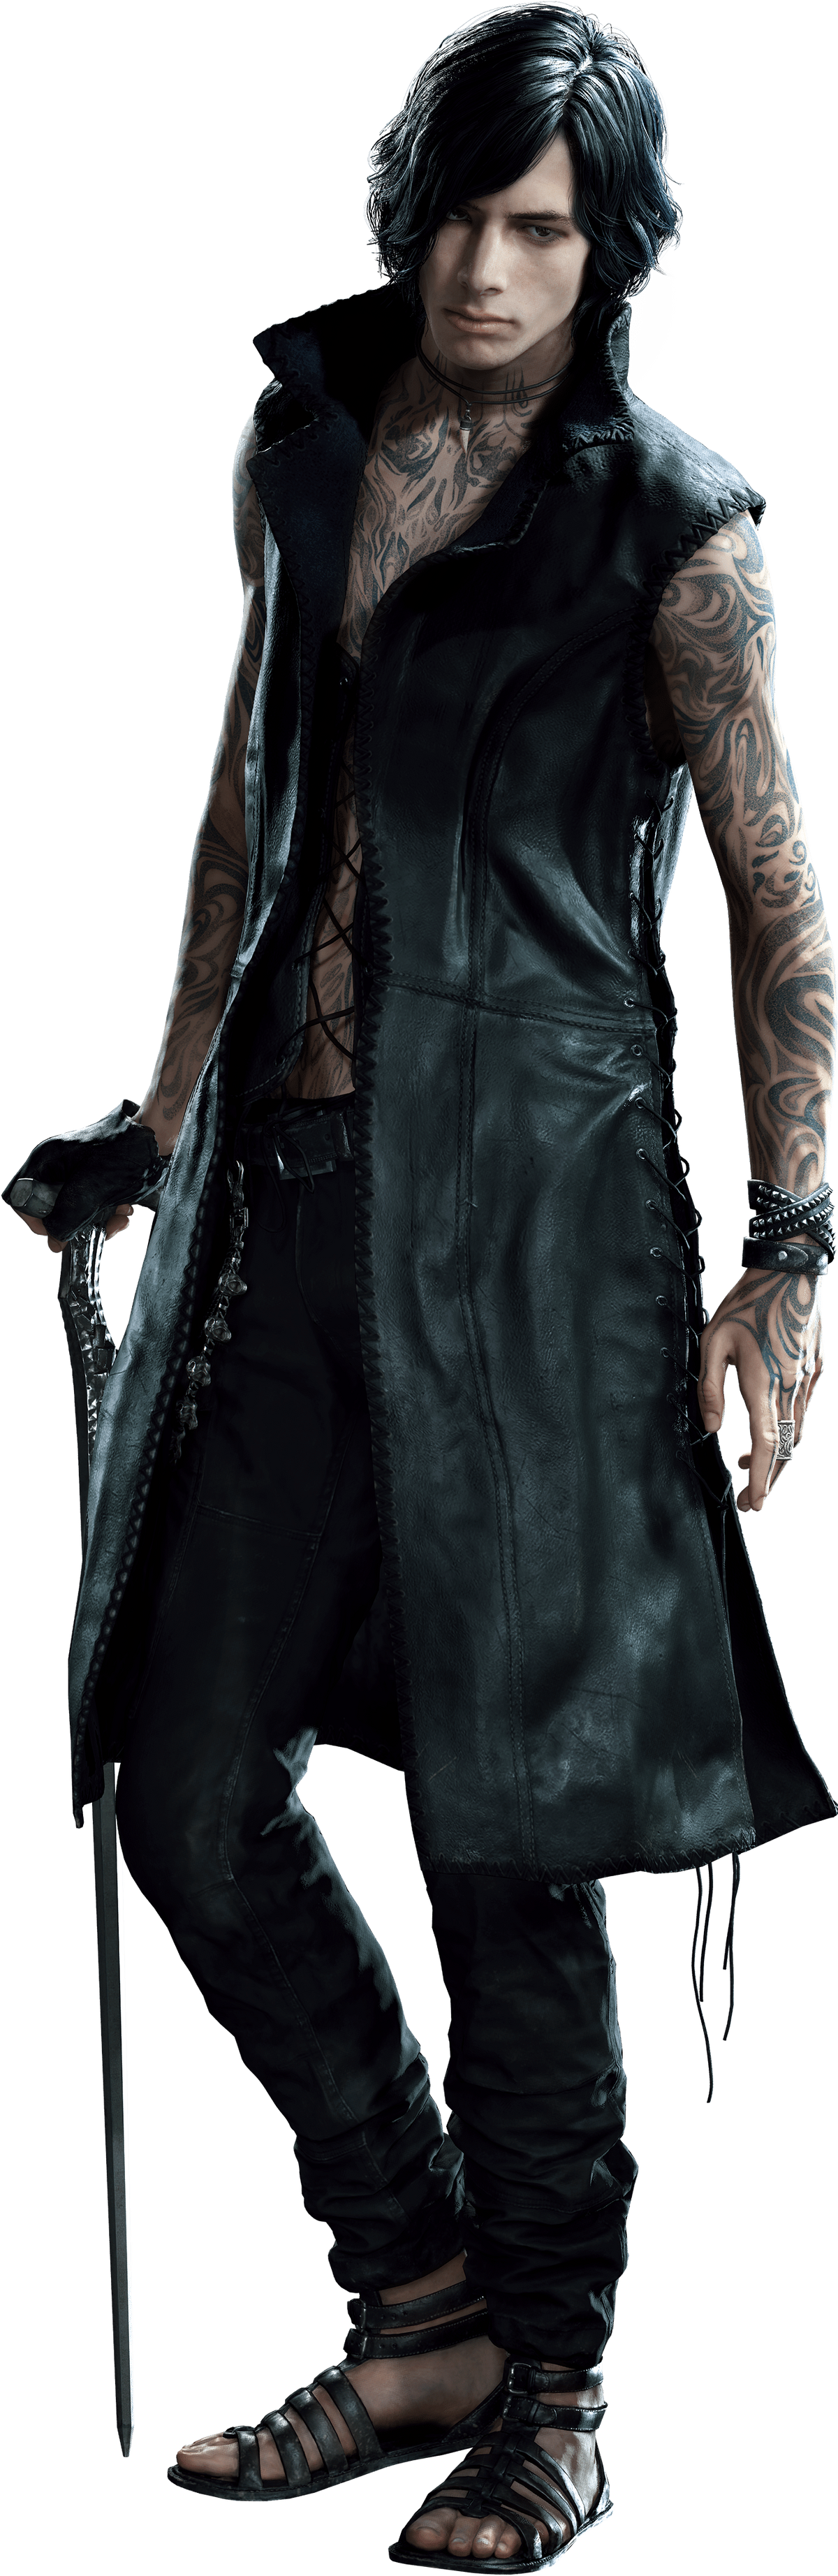 DMC5 V's Outfit [WIP / PROOF OF CONCEPT, INCOMPLETE!]